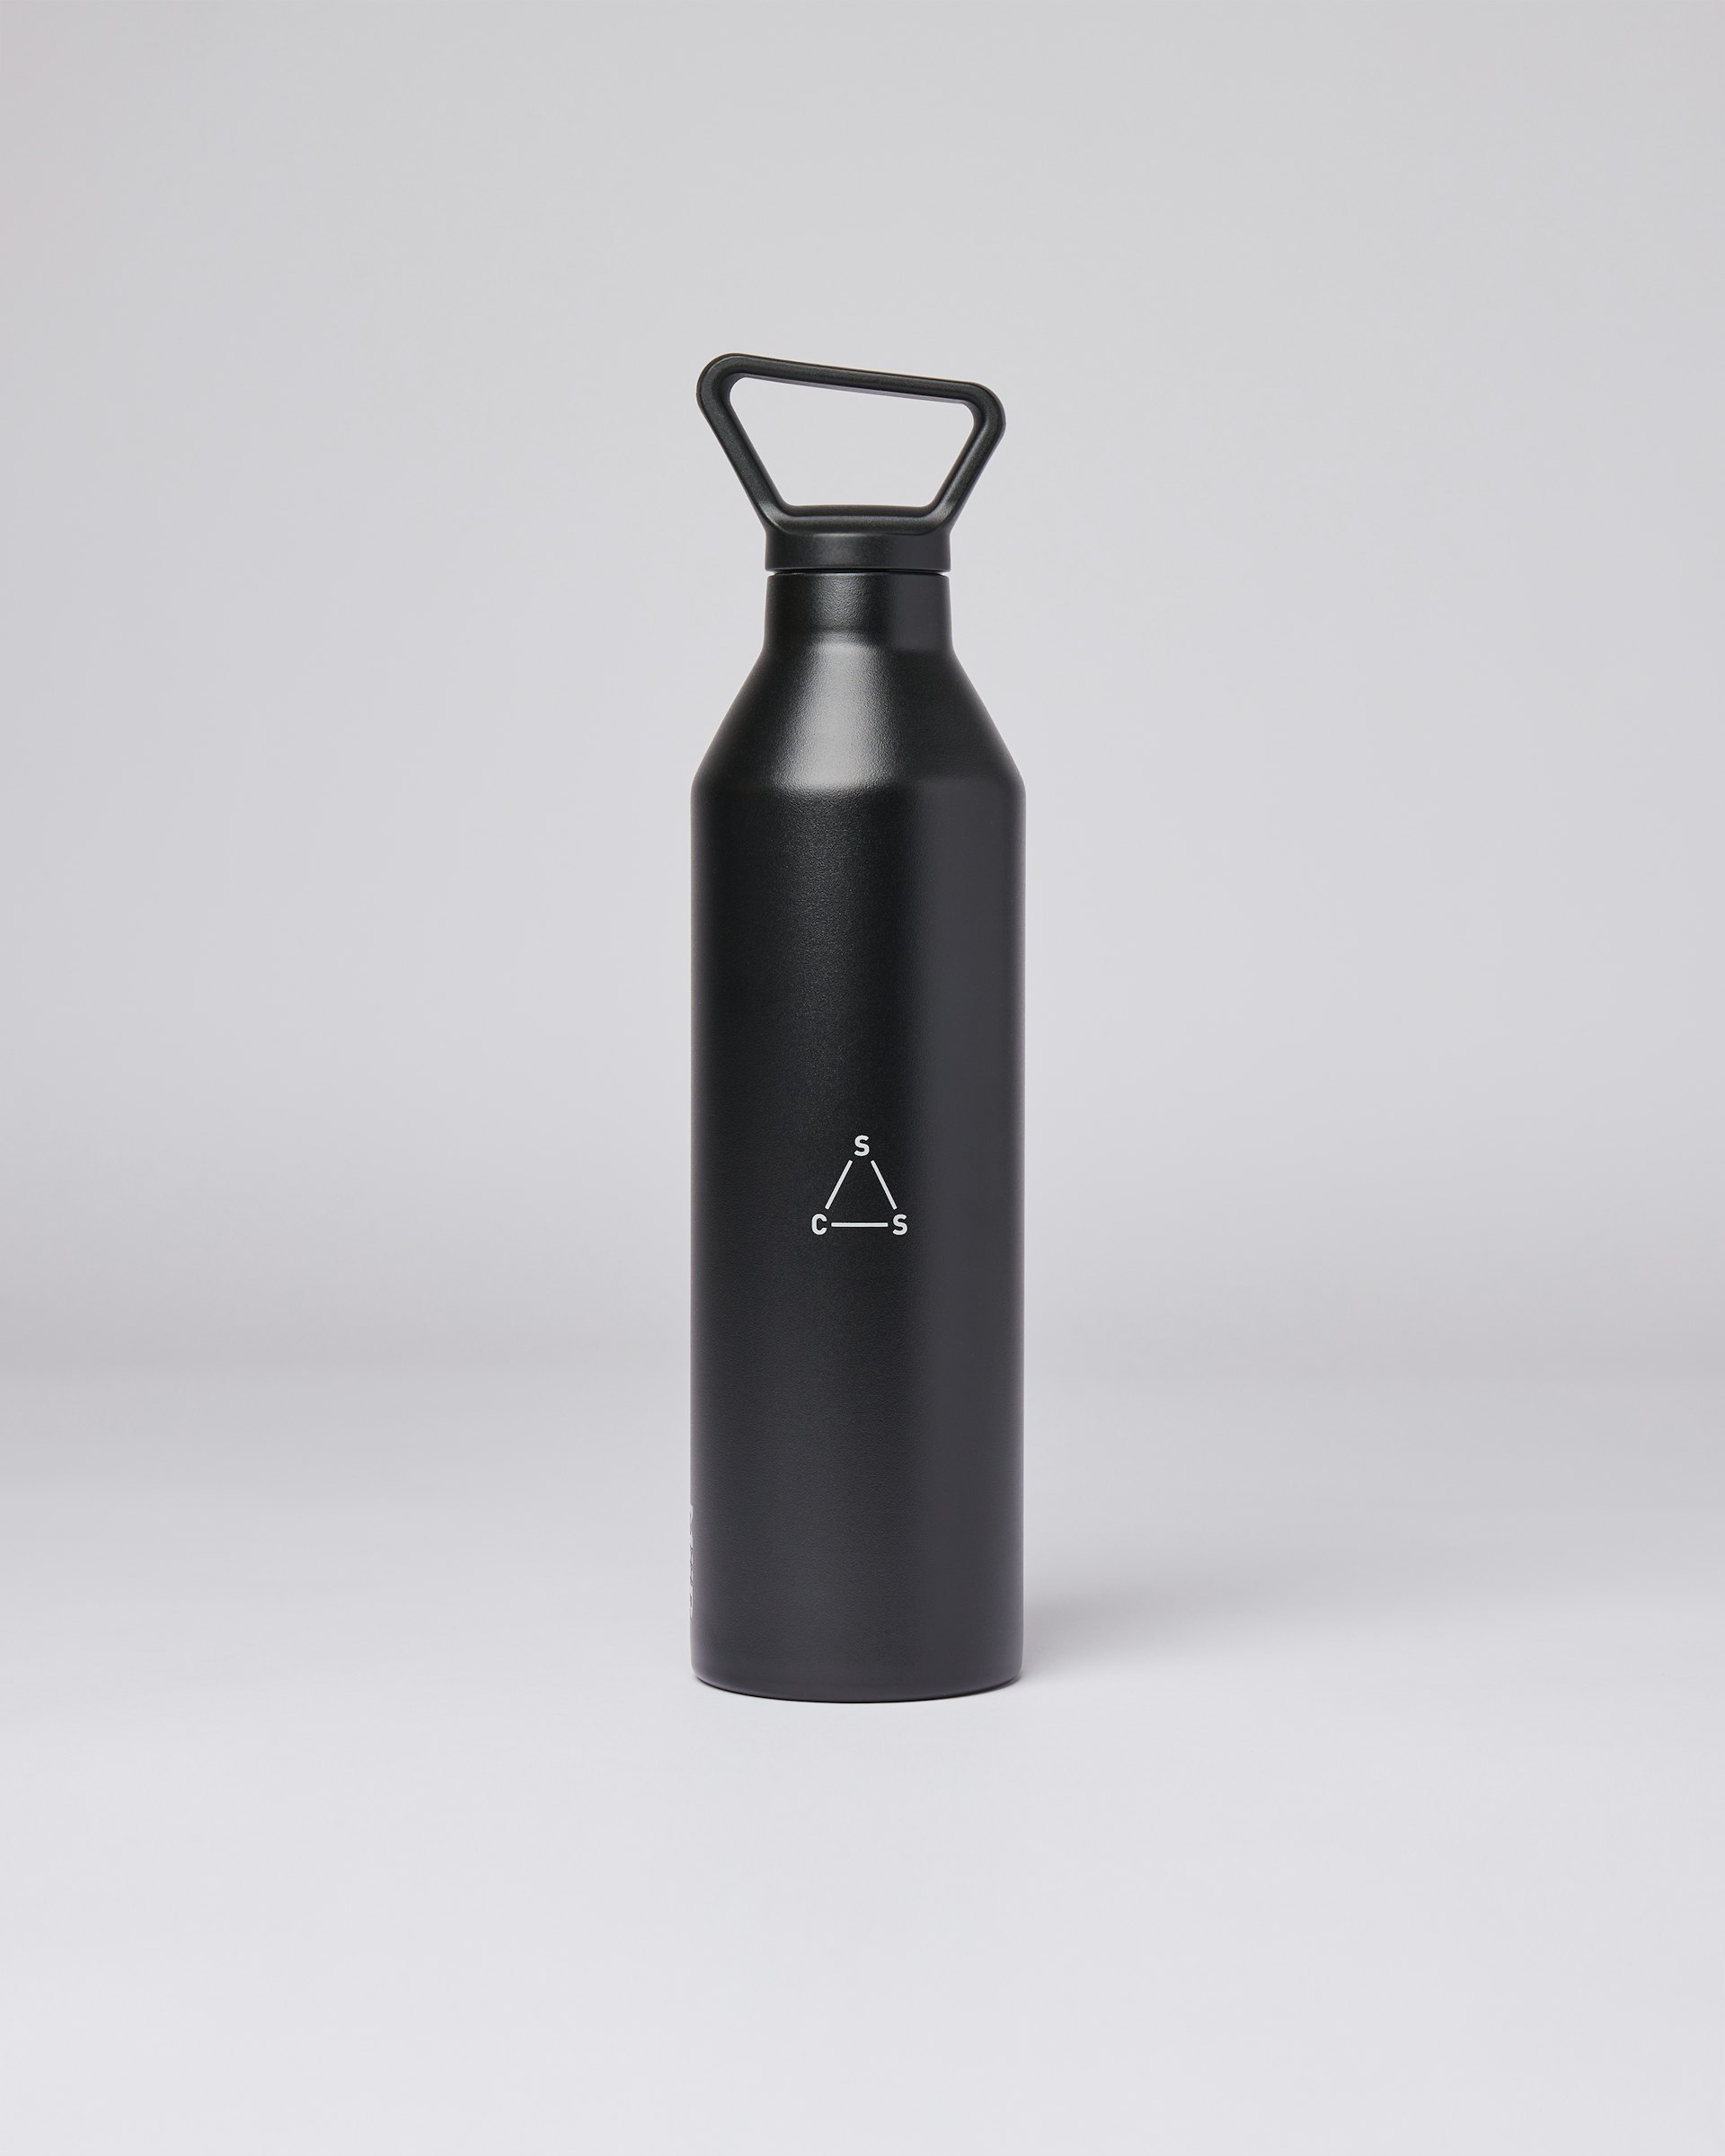 23oz Bottle belongs to the category Items and is in color black (1 of 3)